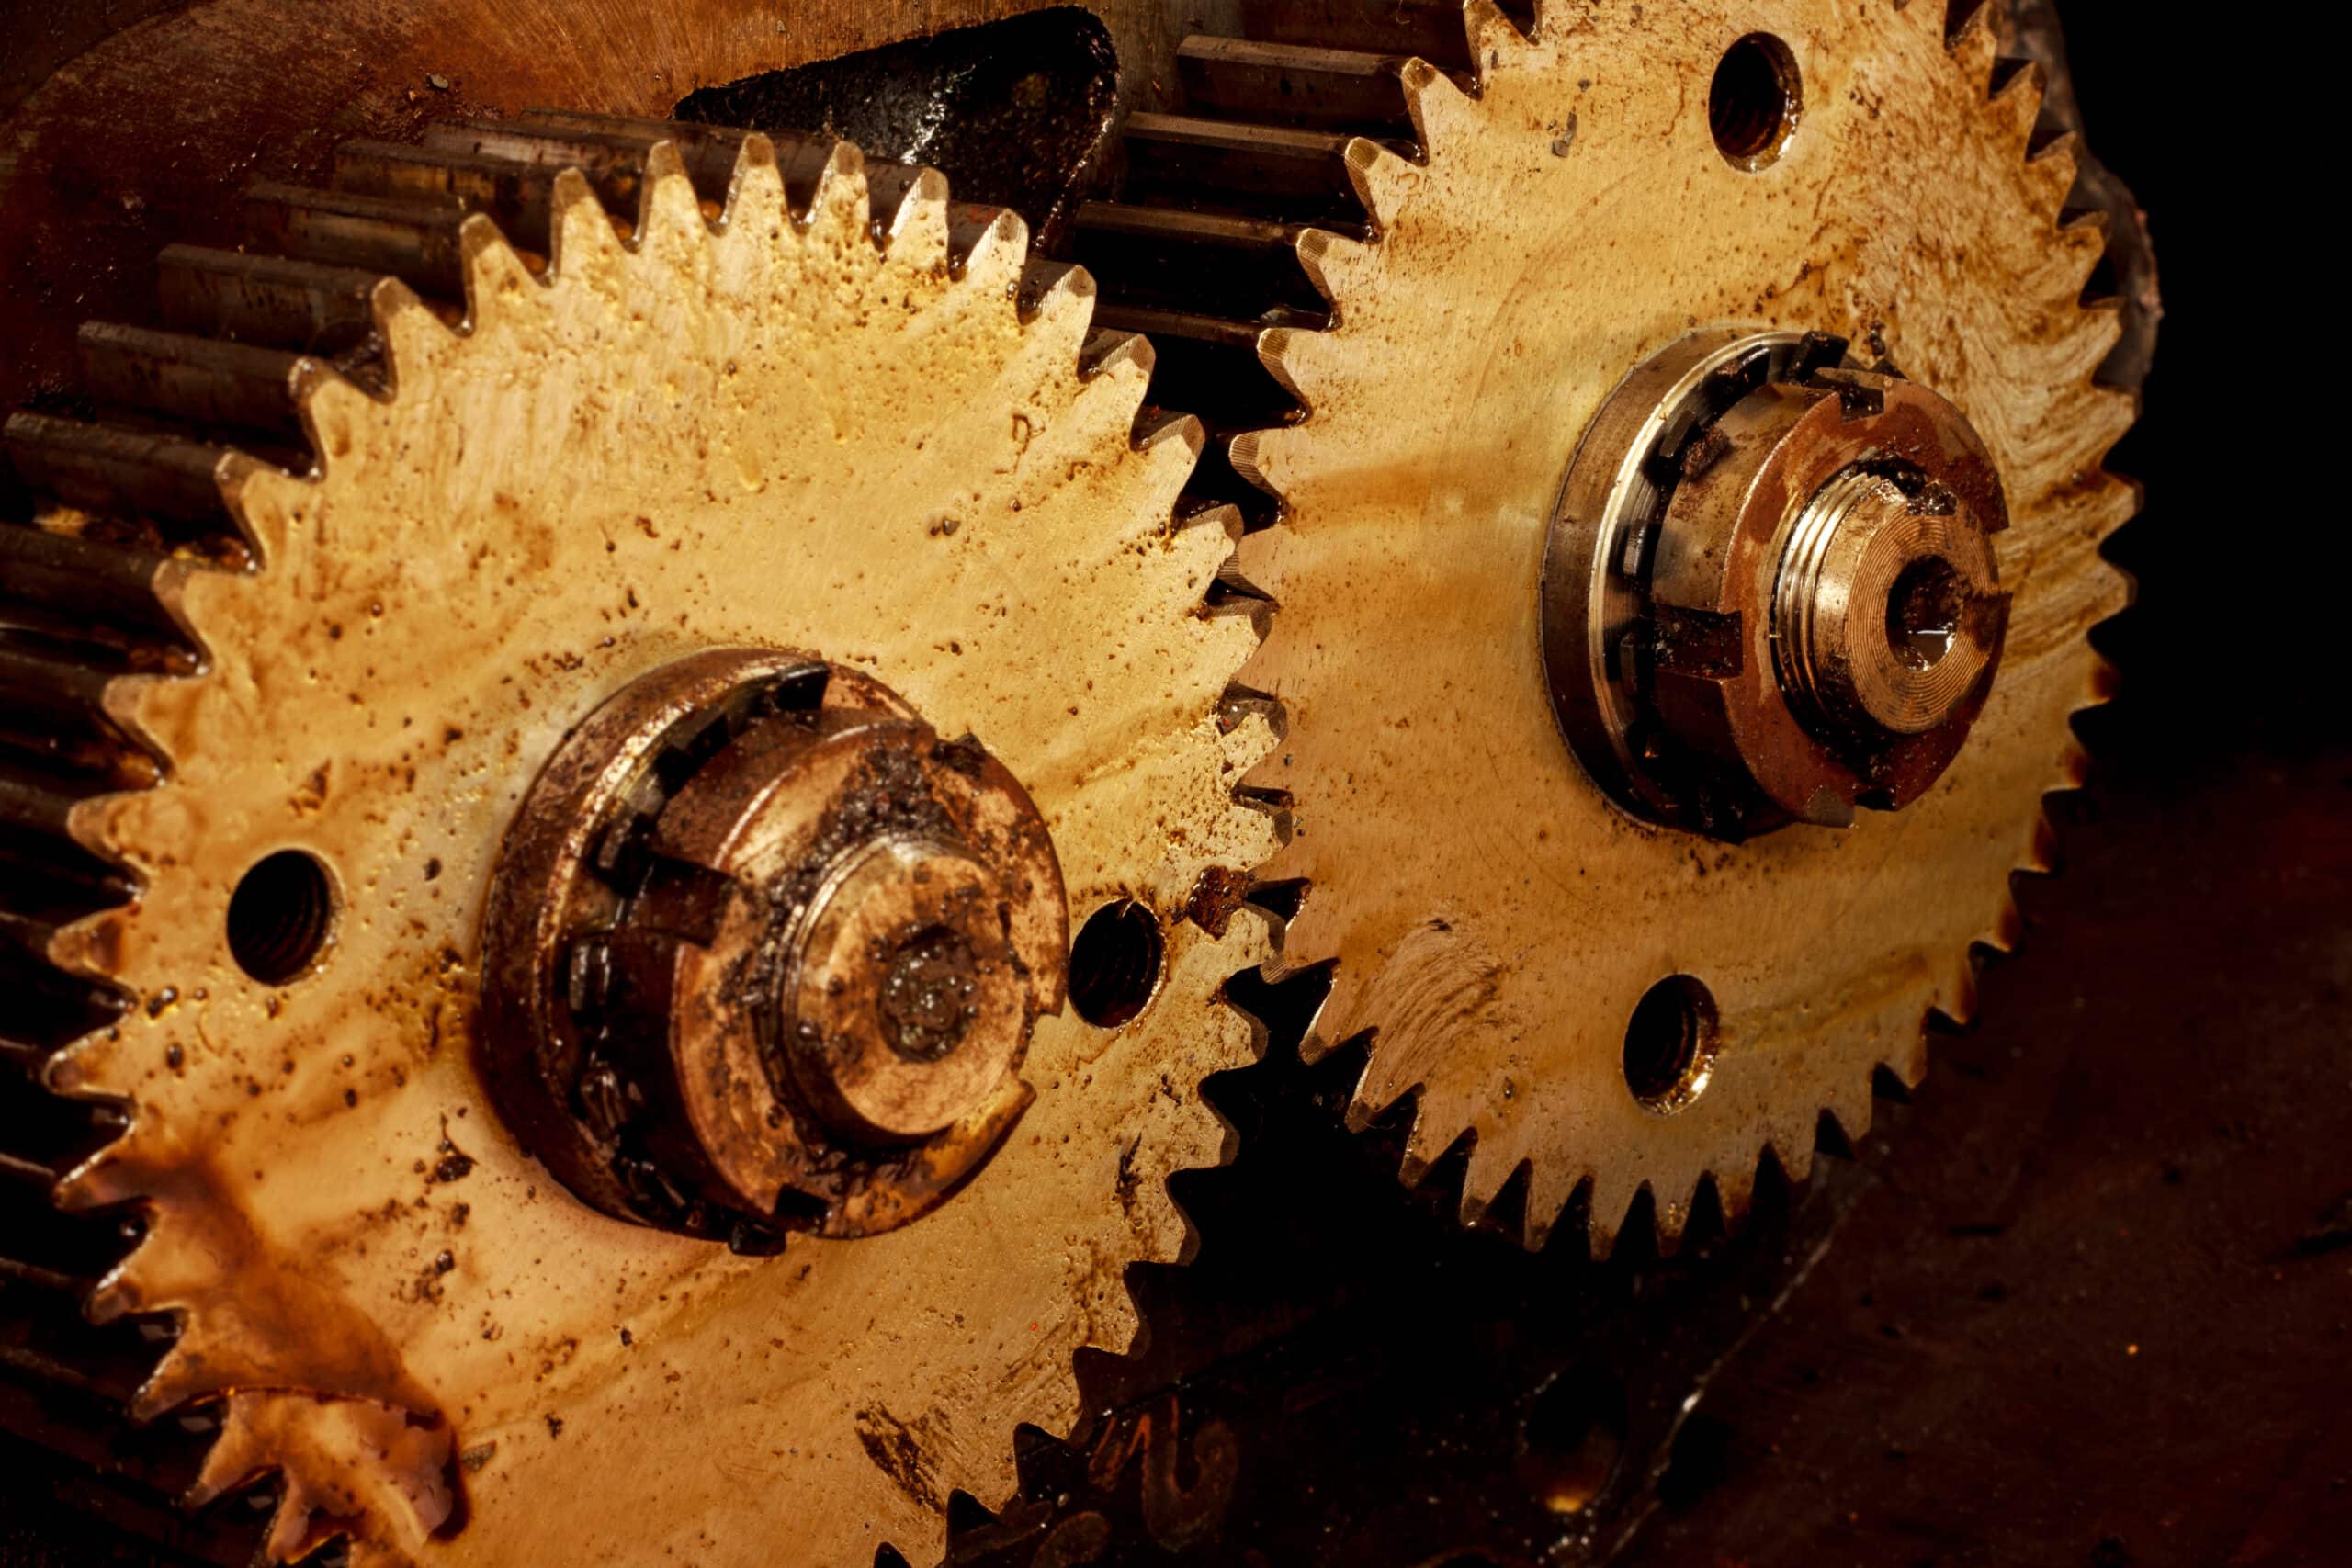 Gears depicting functionality